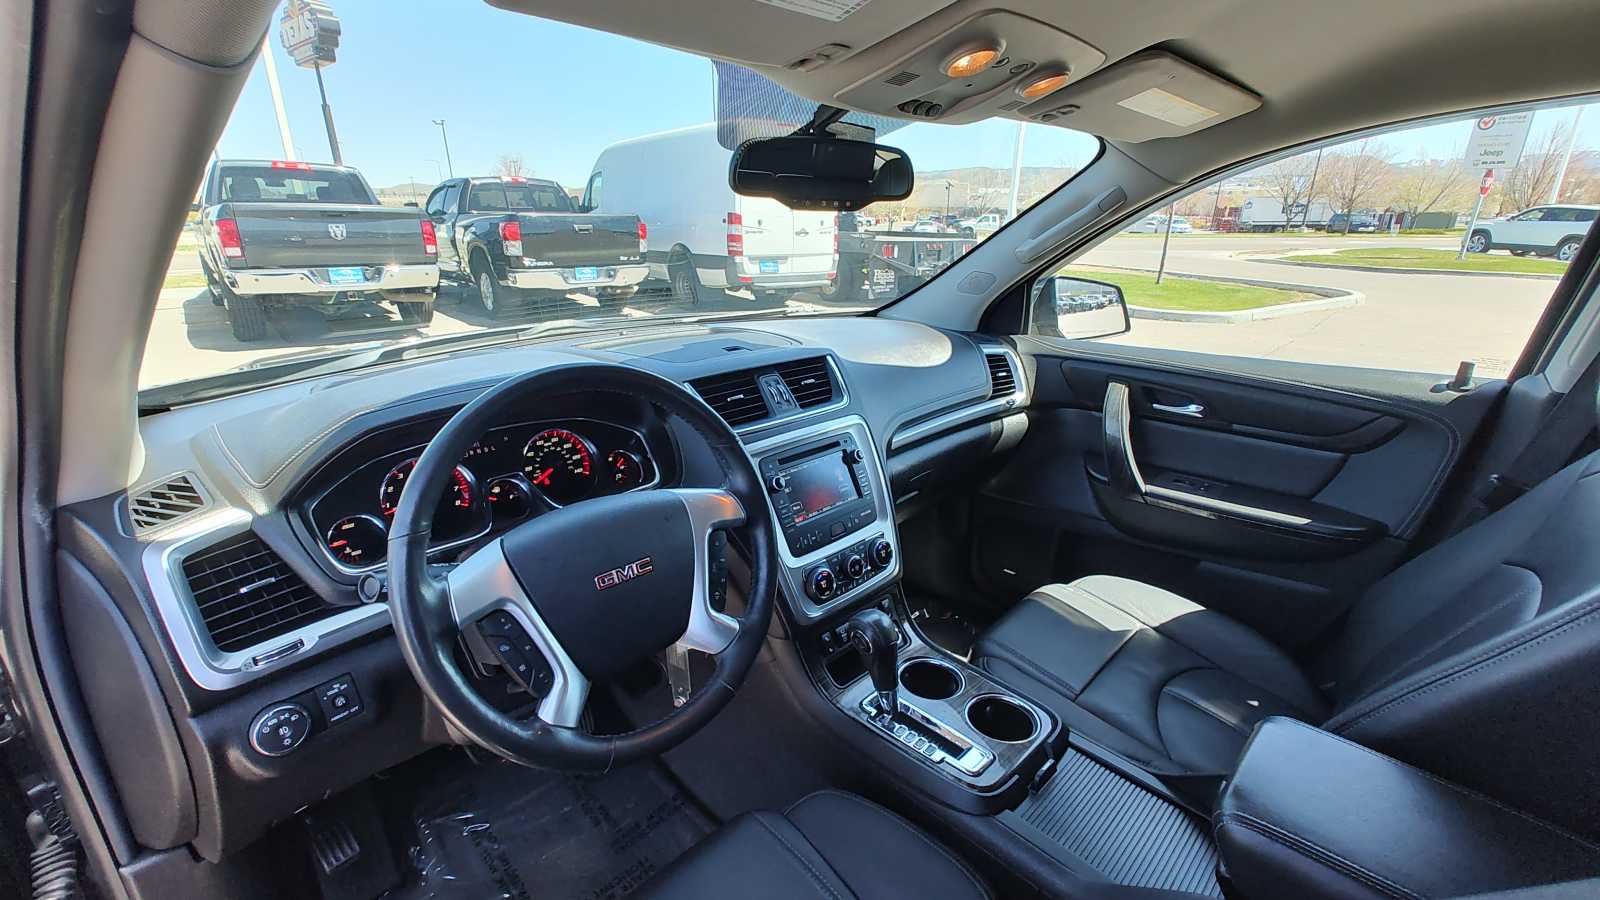 Used 2017 GMC Acadia Limited  with VIN 1GKKVSKD2HJ168433 for sale in Pocatello, ID